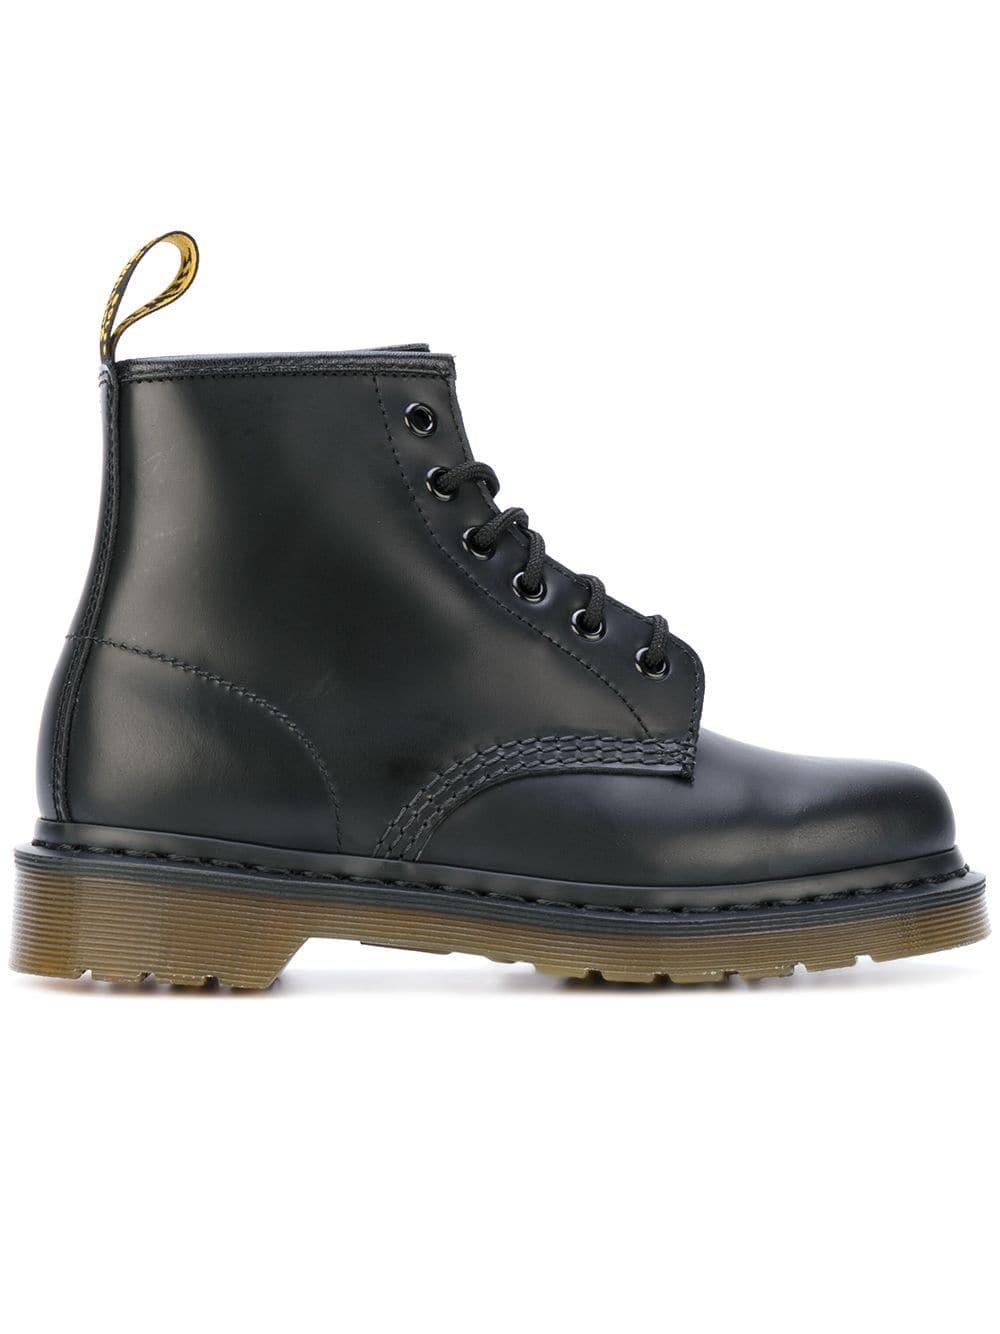 homosexual Remains small Dr. Martens 101 Smooth Boots in Black | Lyst Australia